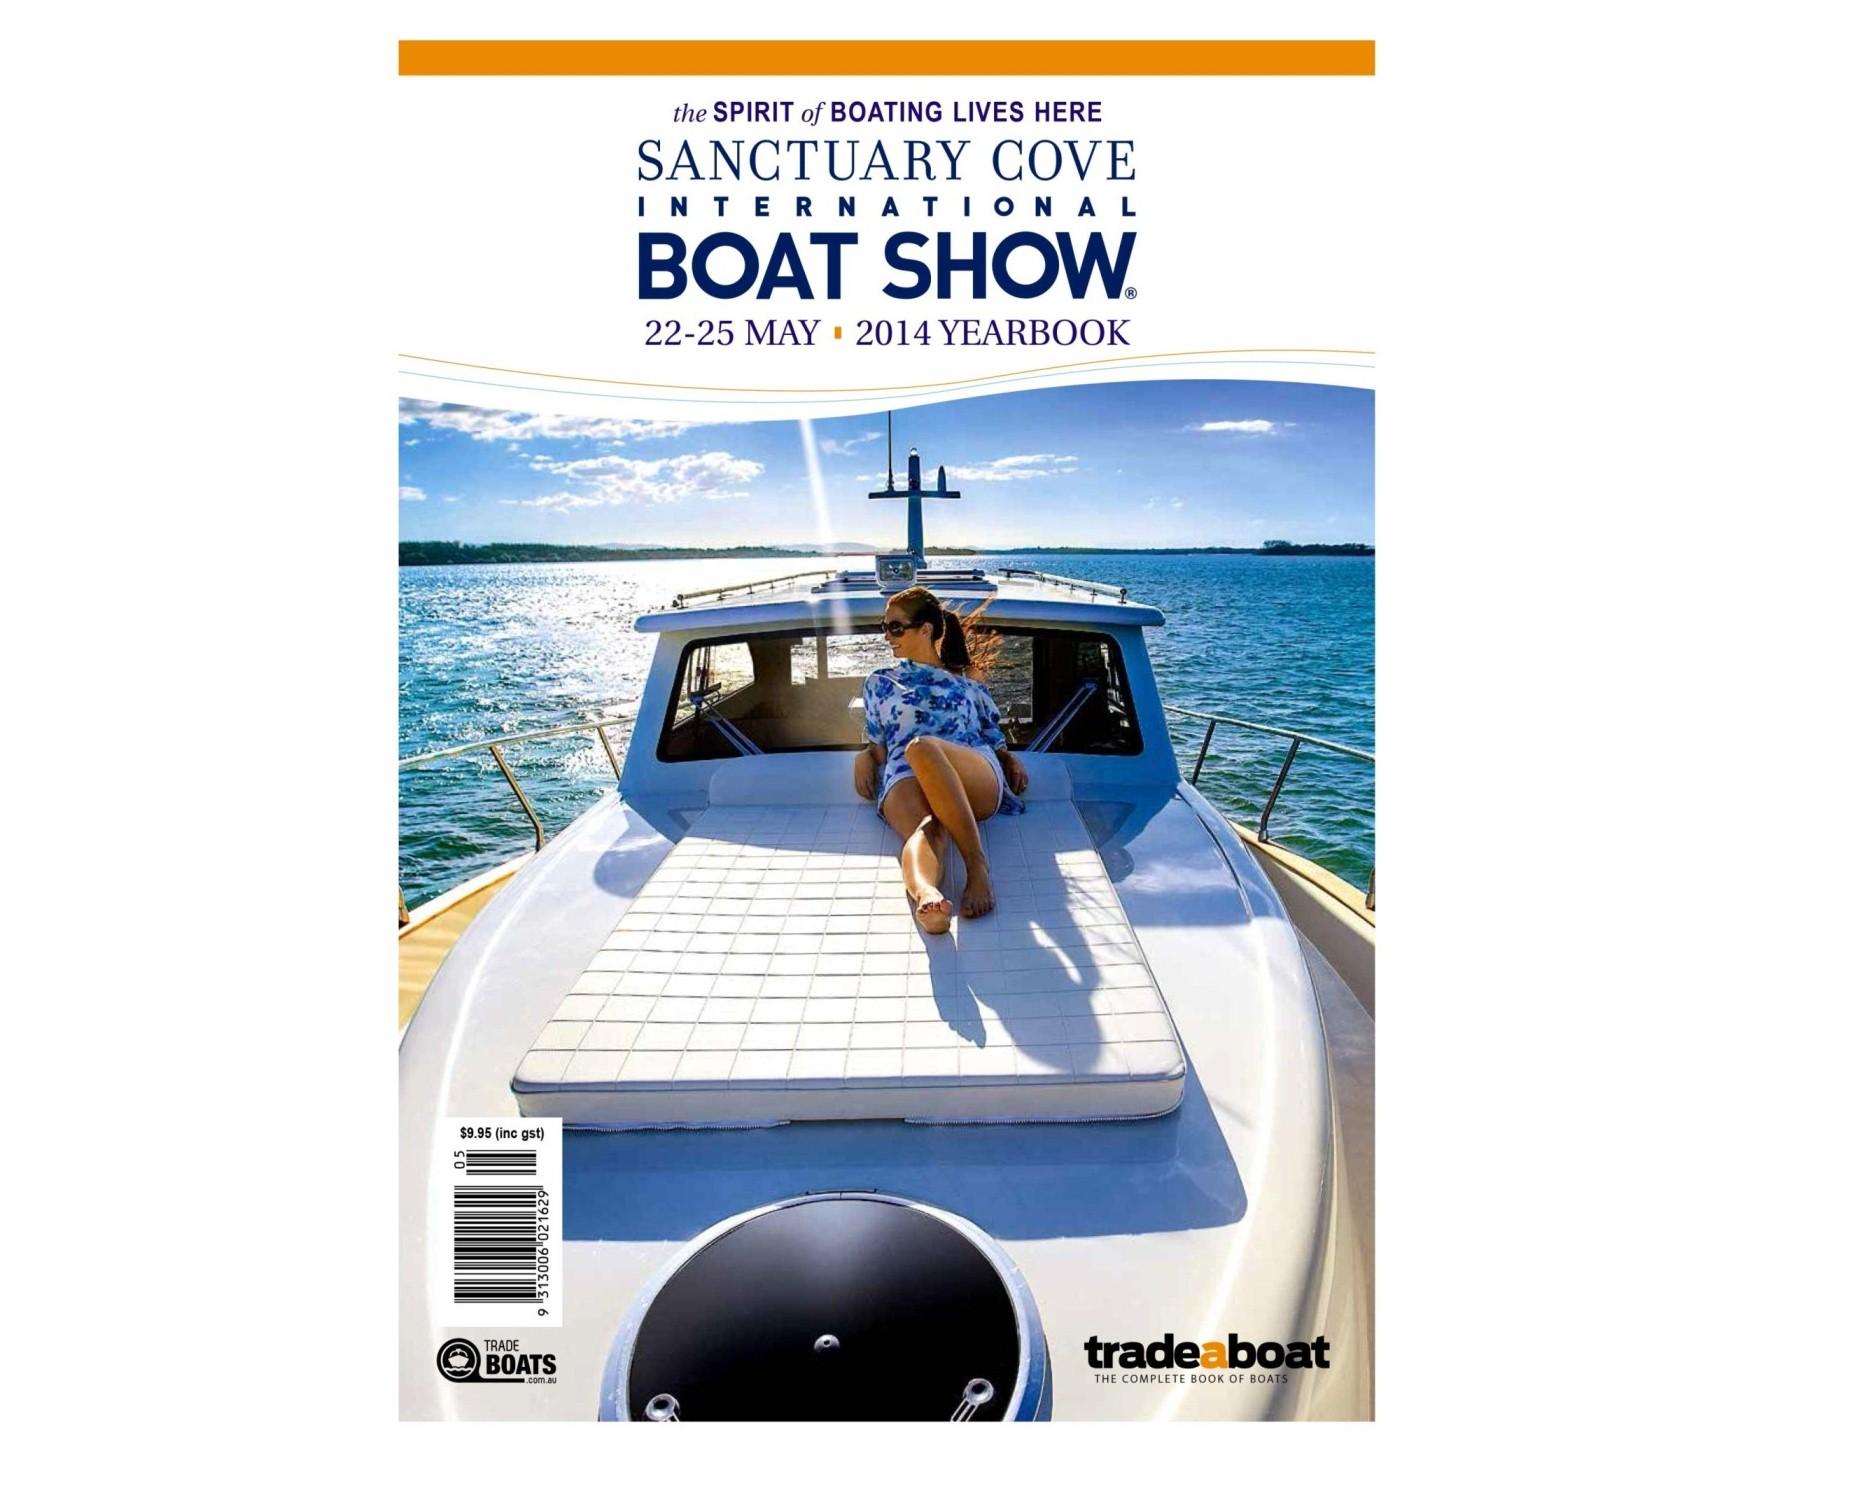 Have you got your copy of the 2014 Sanctuary Cove International Yearbook?